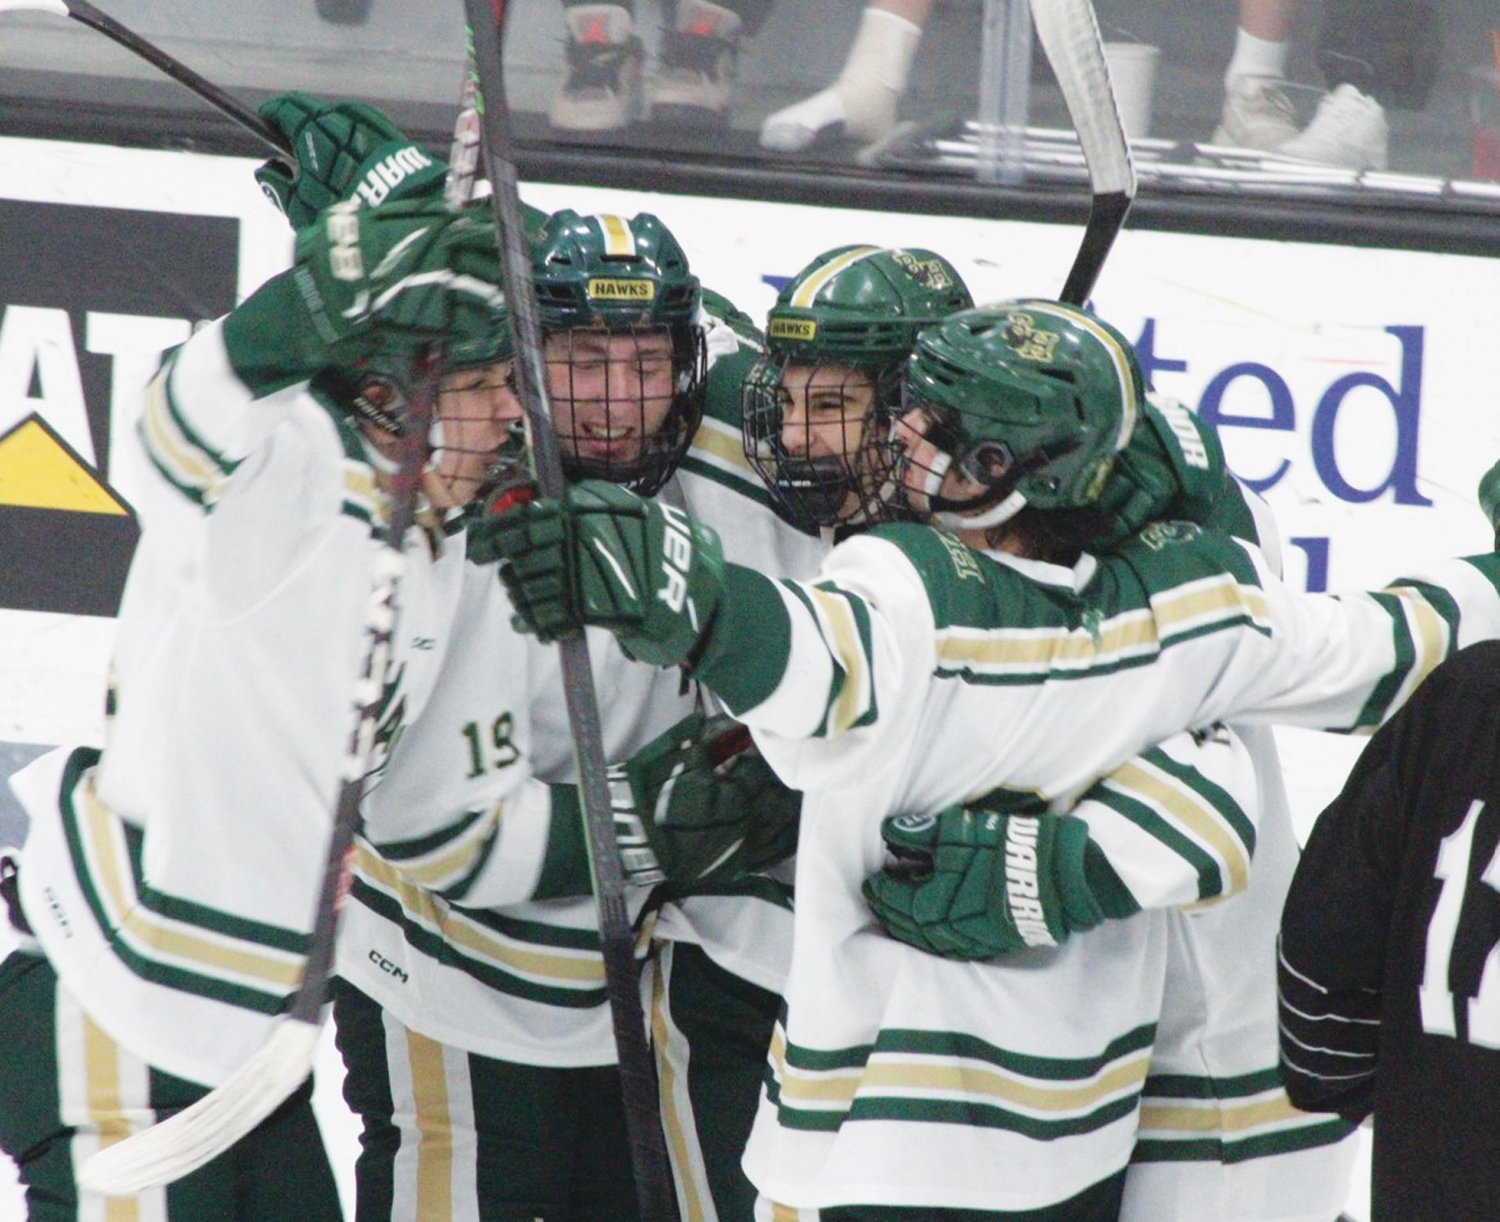 ON TO THE FINALS: Members of the Hendricken hockey team after scoring a goal. (Photos by Alex Sponseller)